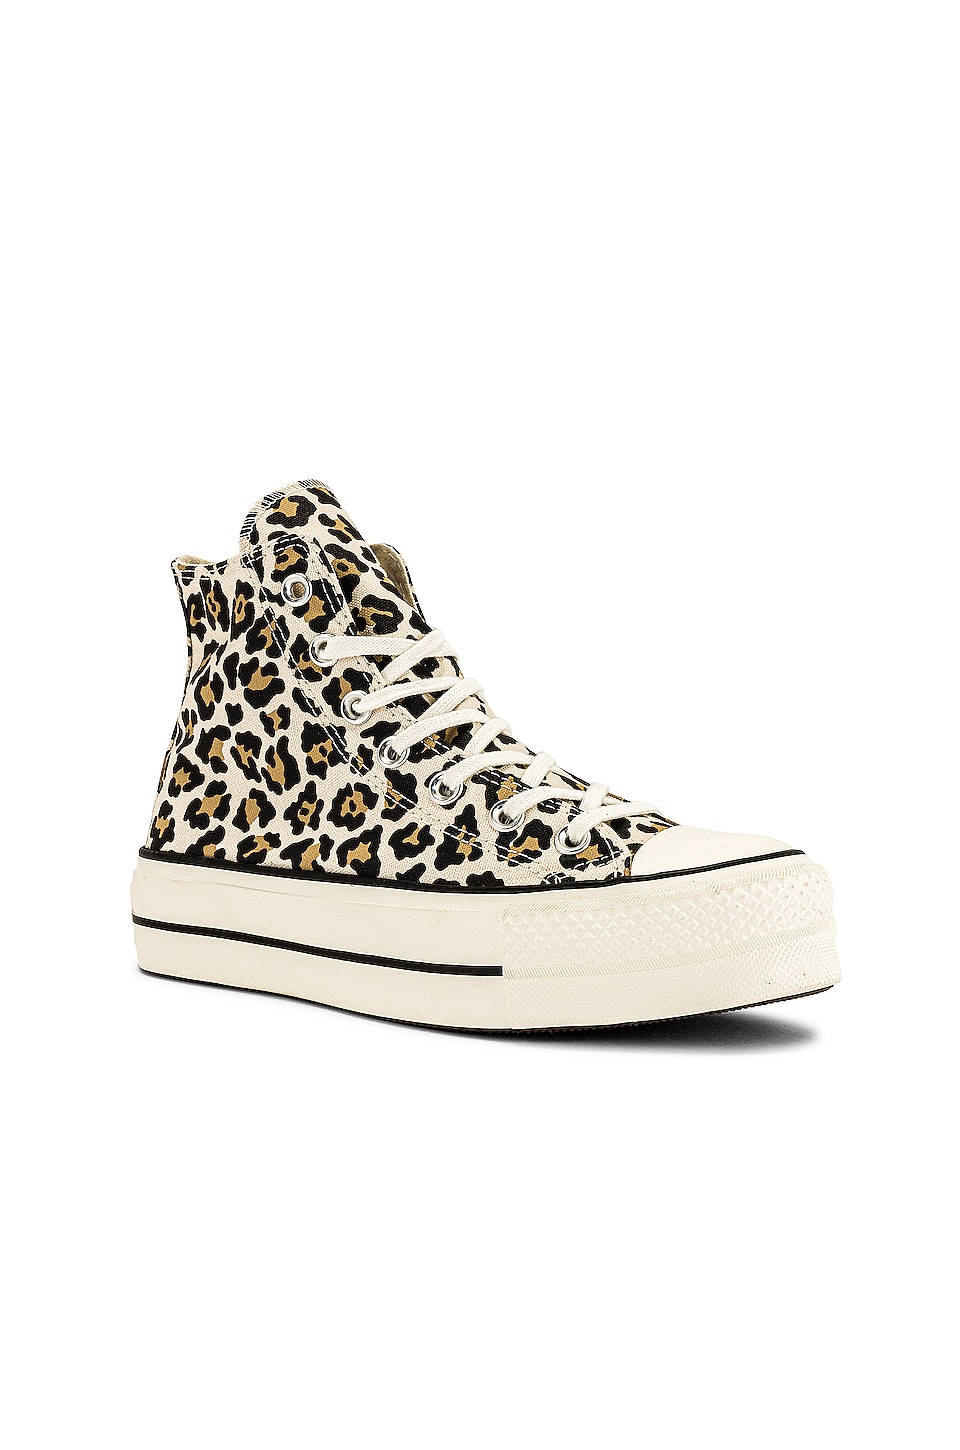 Converse Chuck Taylor All Star Archive Leopard Platform Sneaker in ...